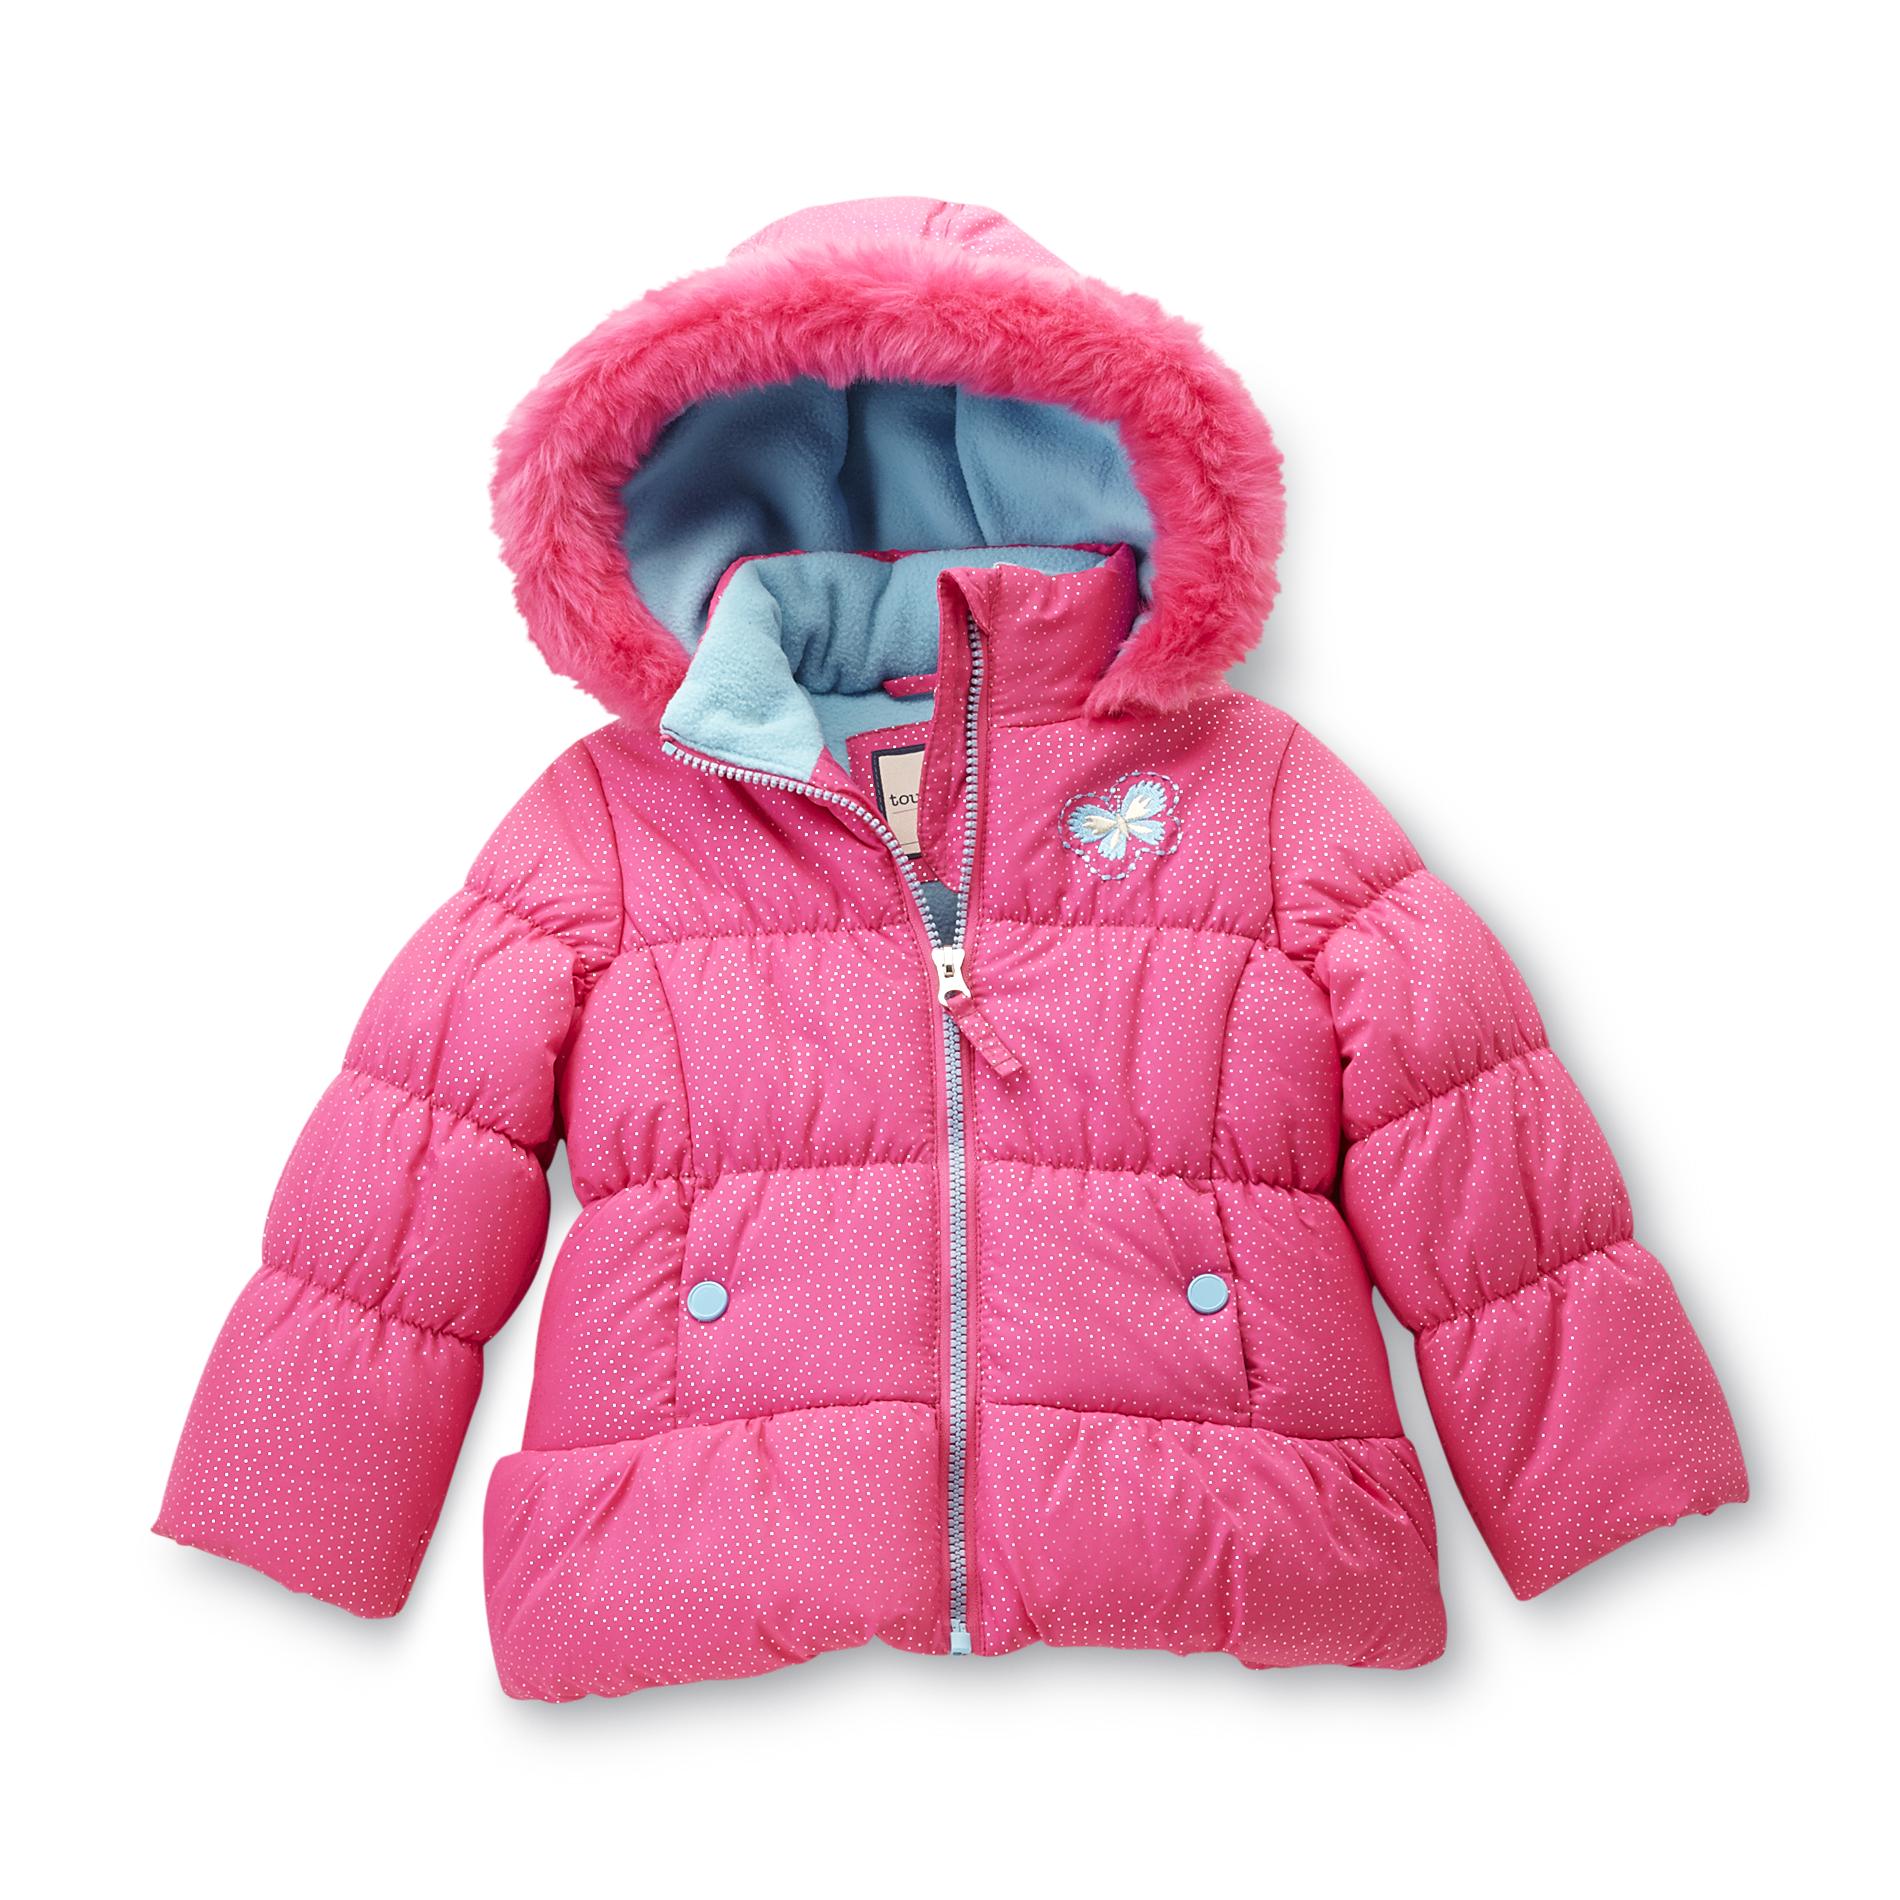 Toughskins Toddler Girl's Bubble Jacket - Butterfly